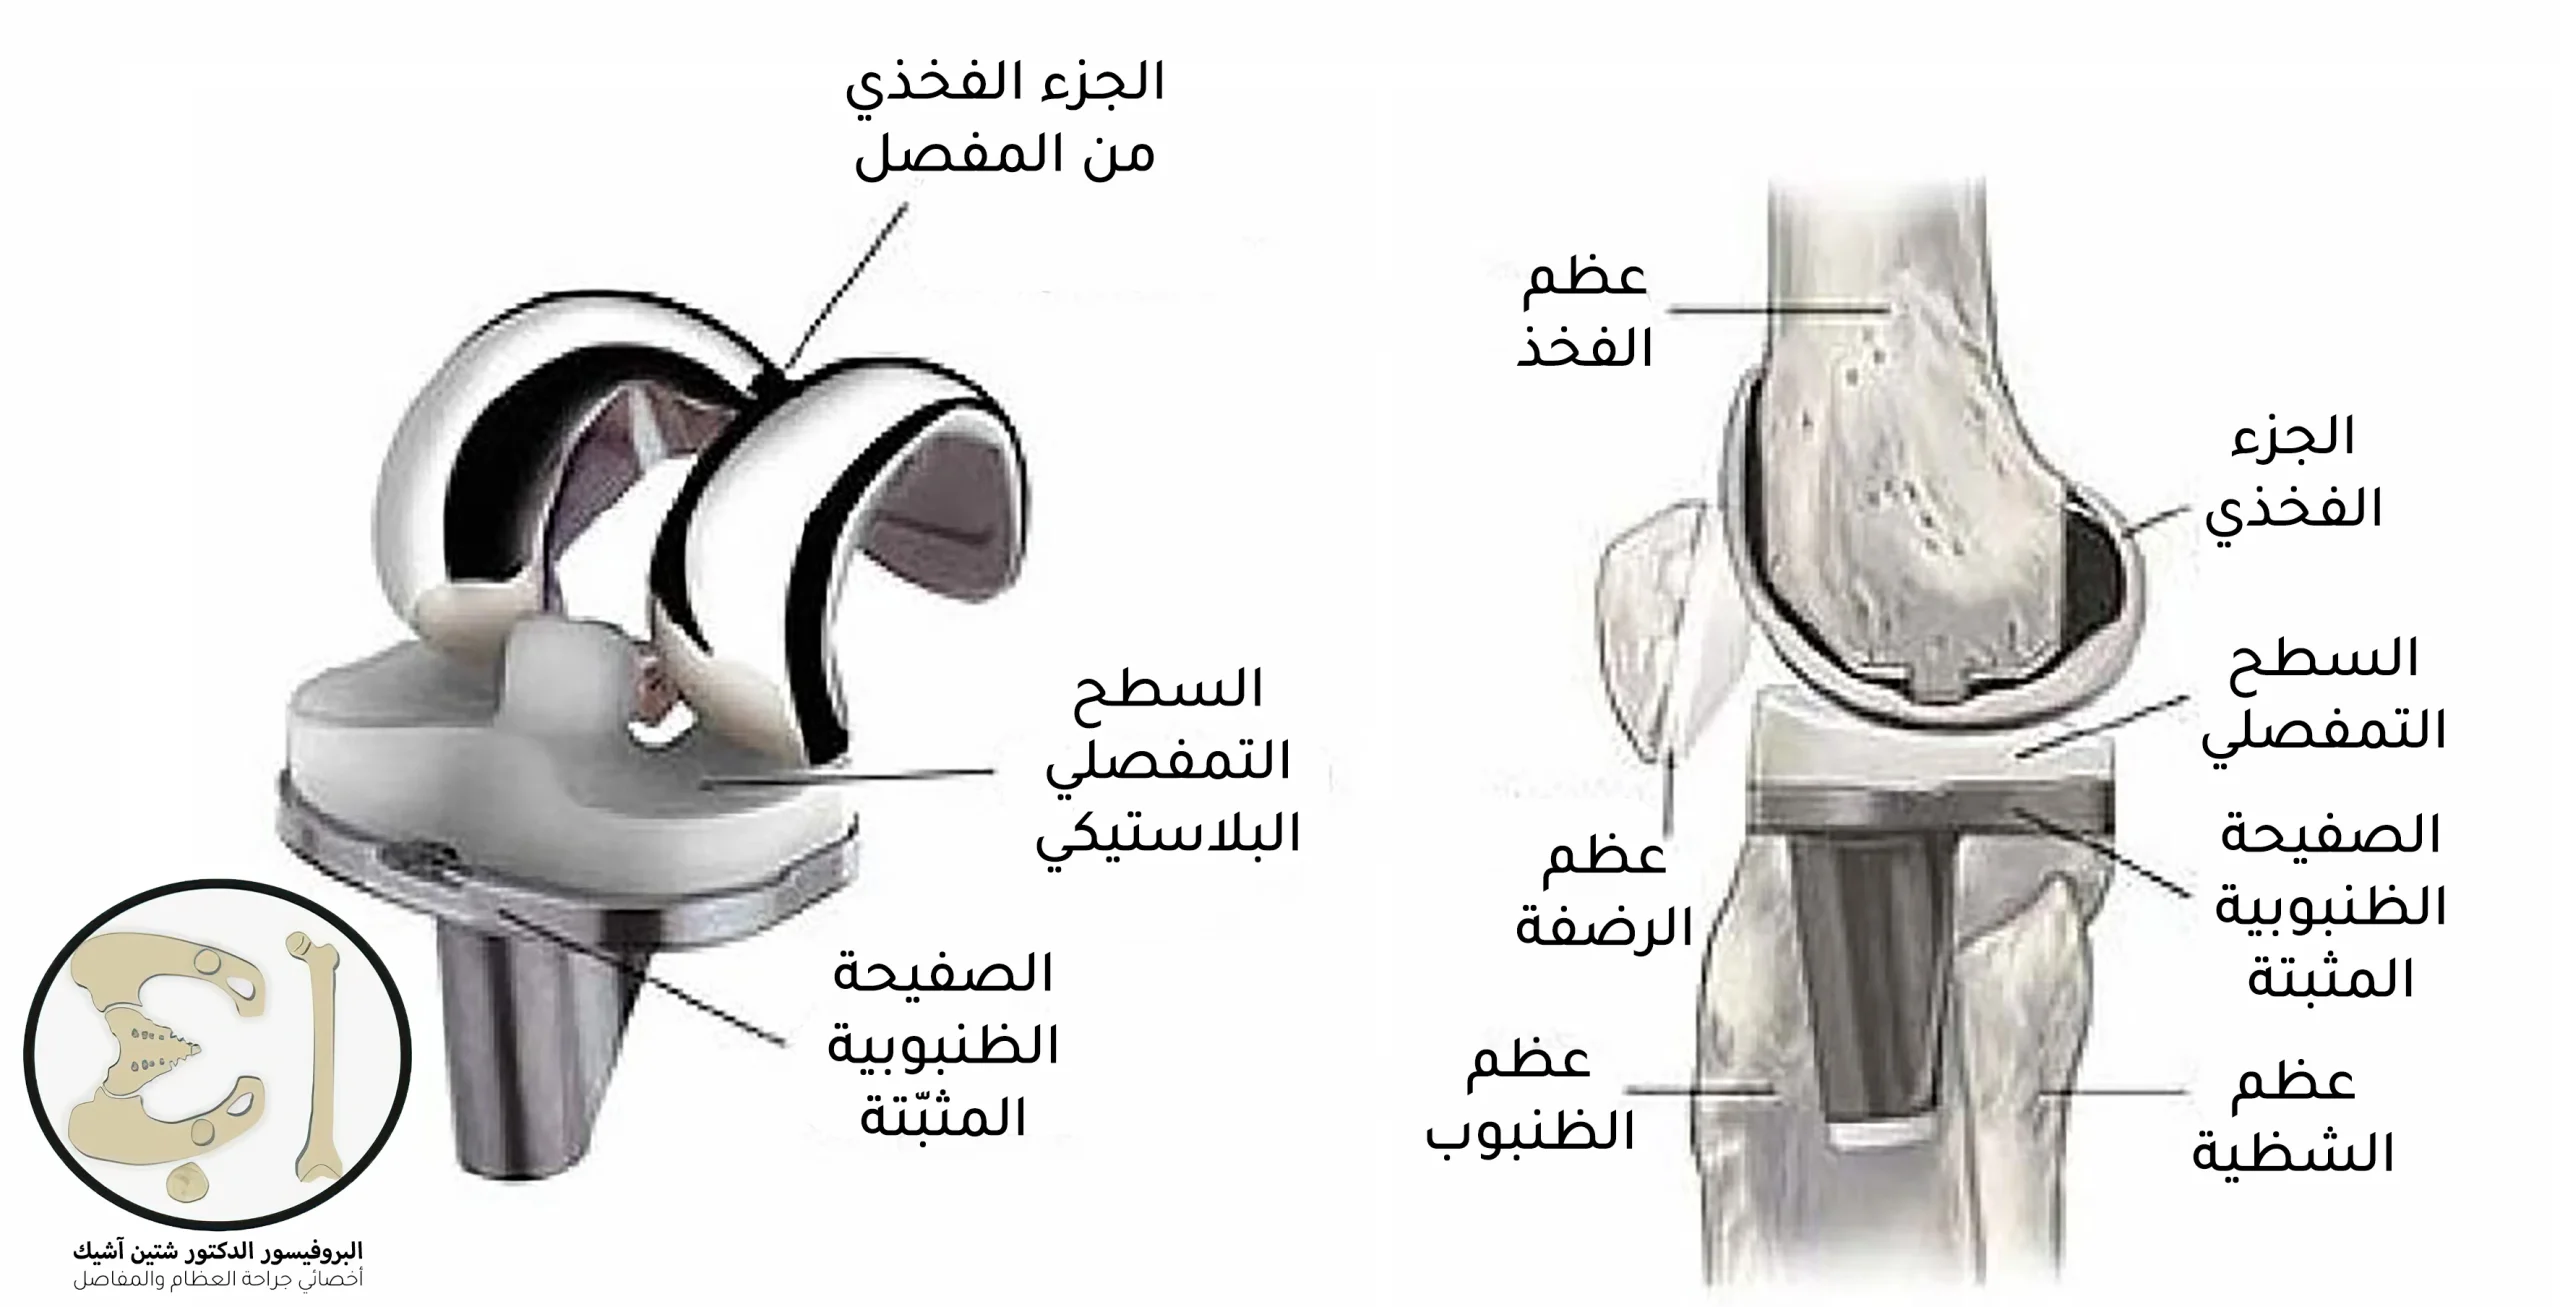 A picture showing the structure of the best types of artificial knee joints